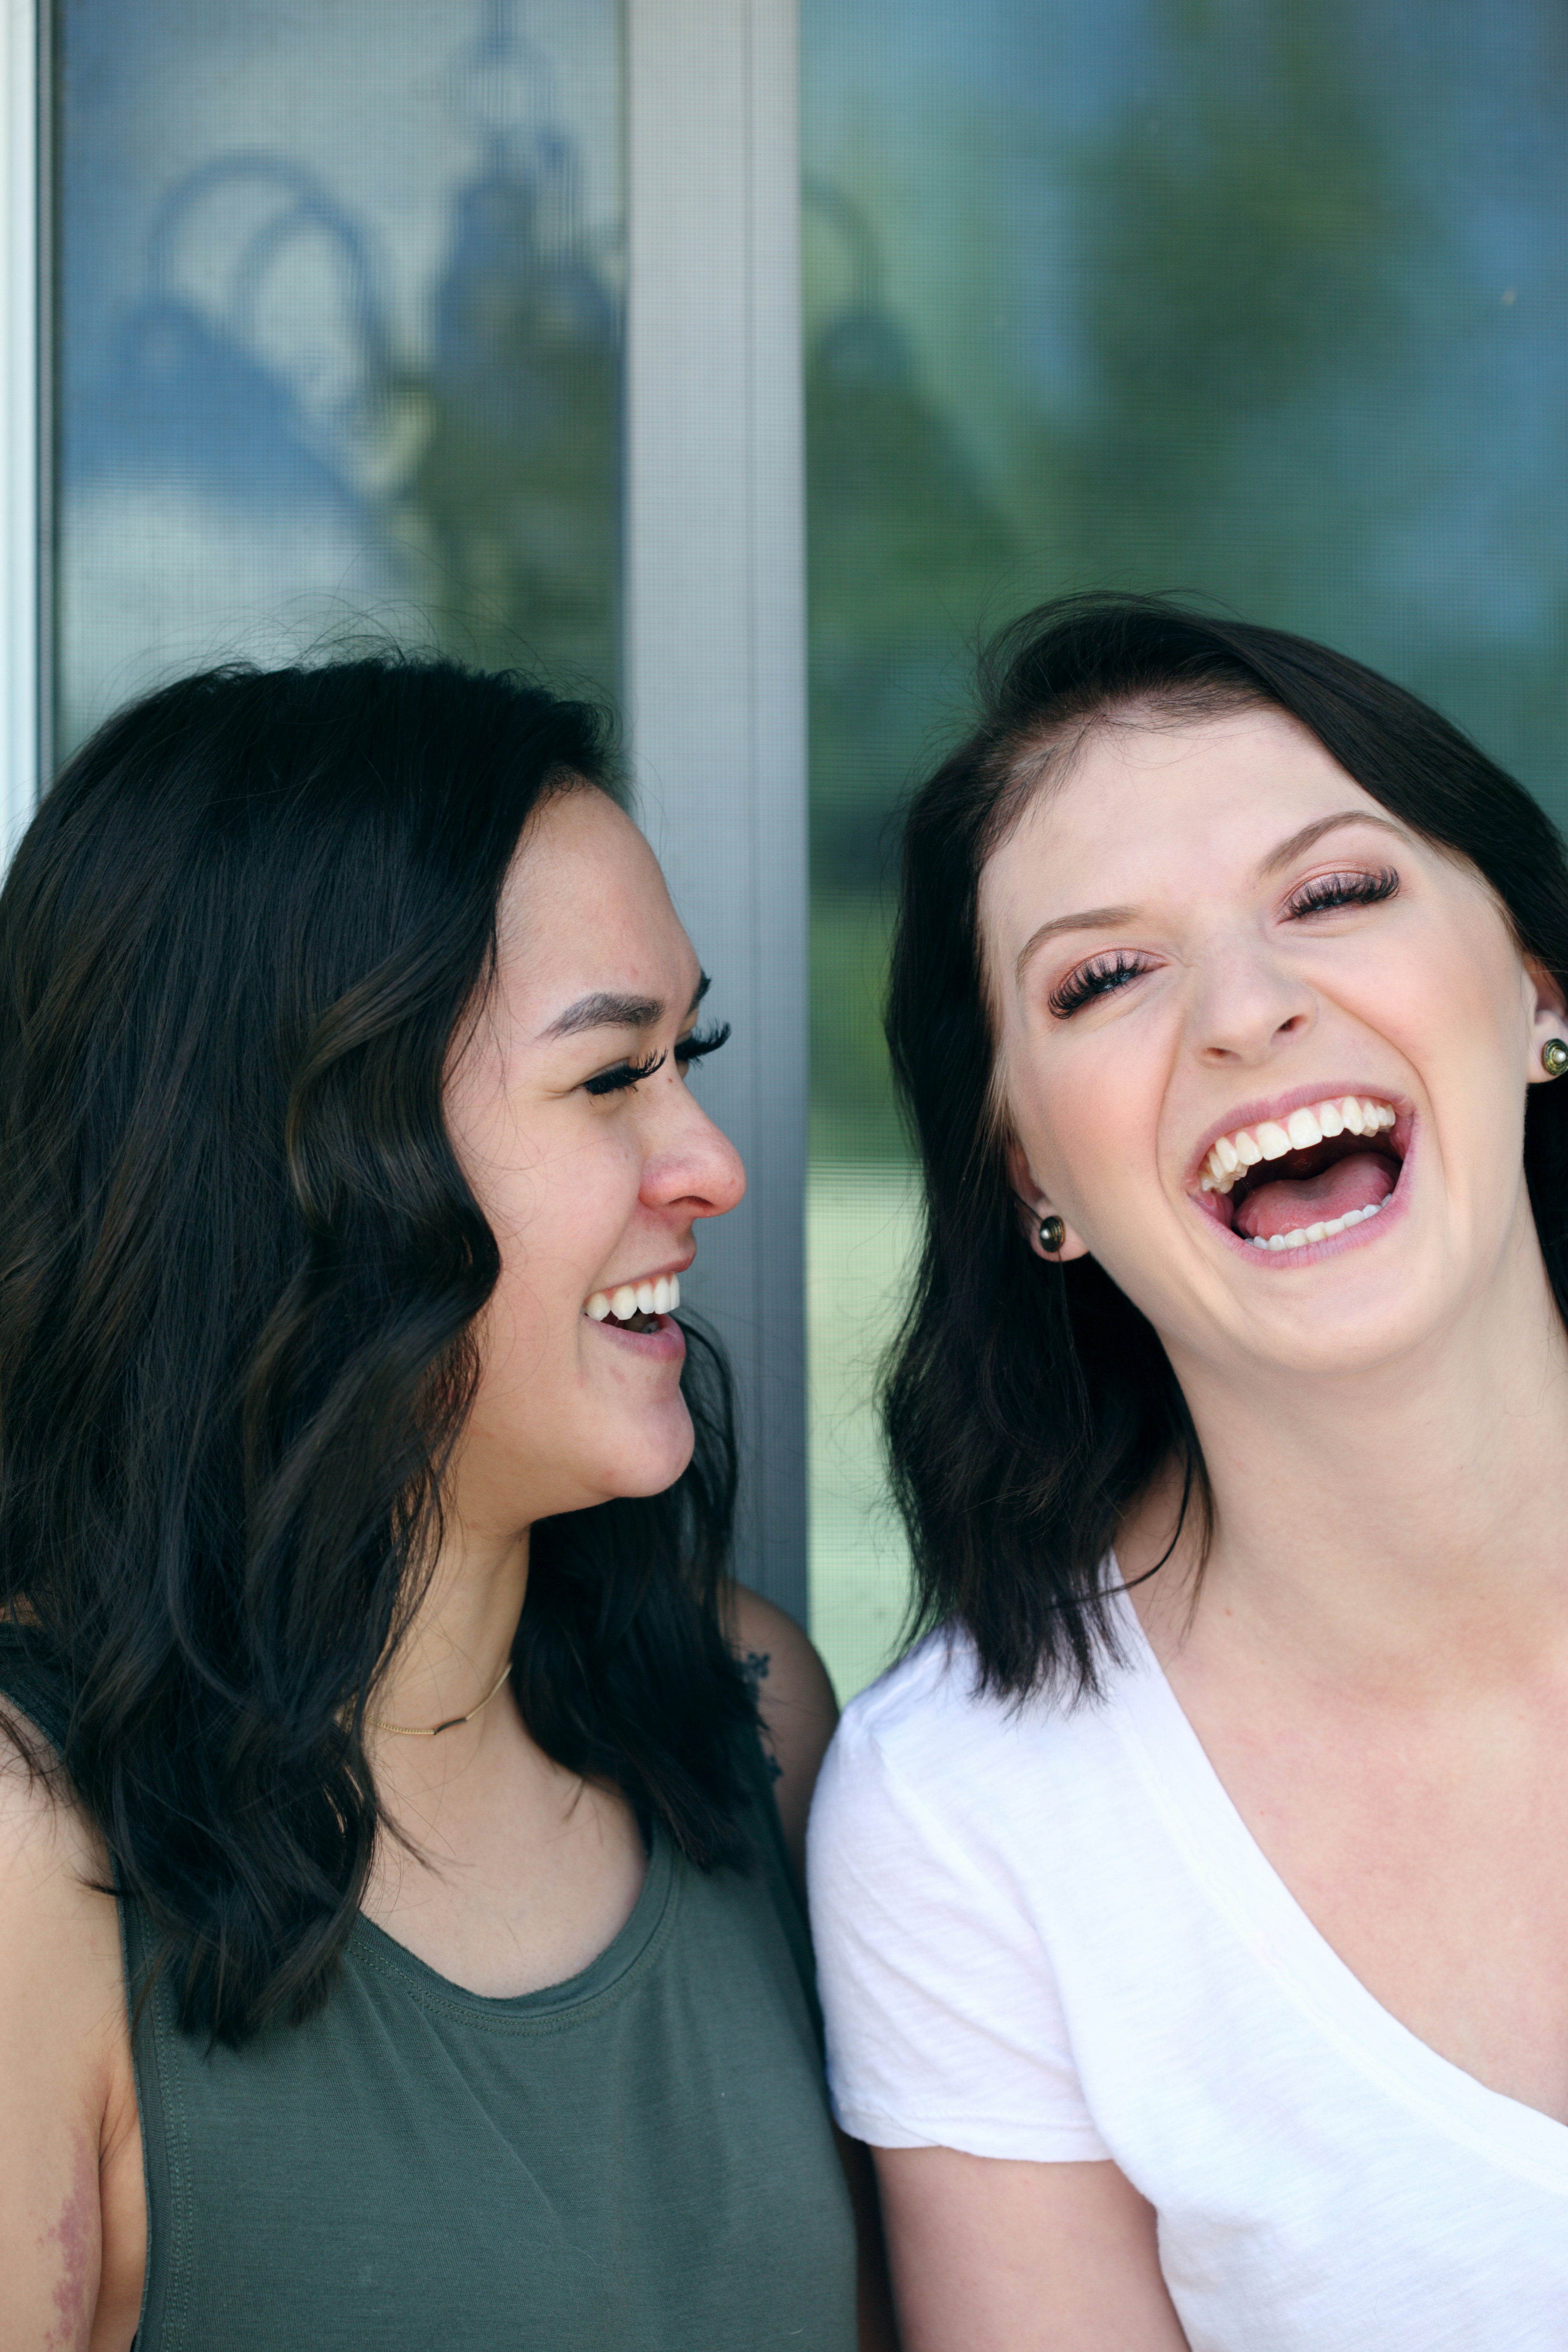 Two women in their early twenties laughing and enjoying the moment.